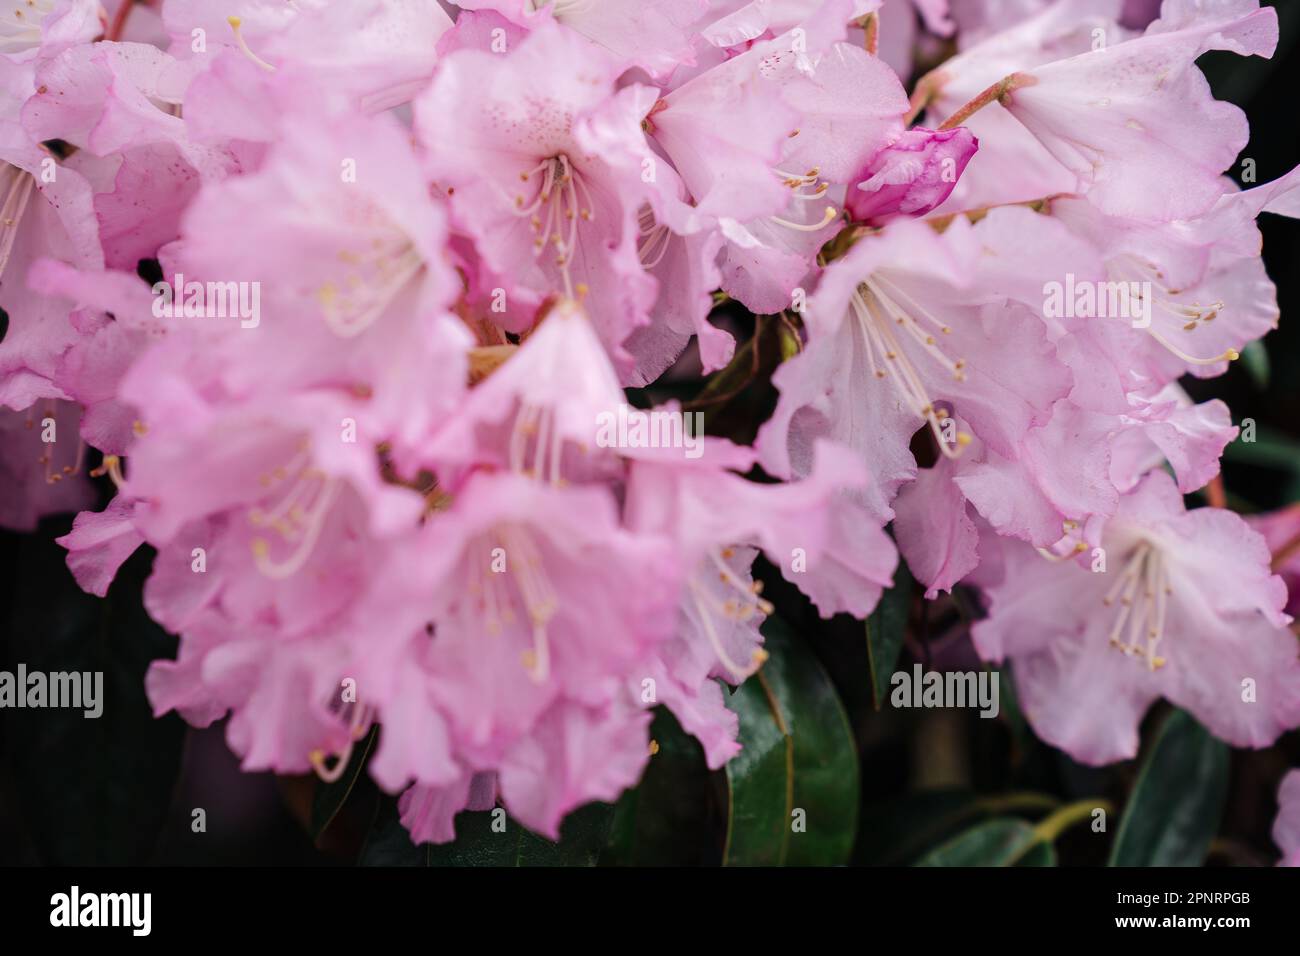 Clothe-up of flowers Rhododendron principis is an evergreen shrub growing 2 to 6 m tall with leathery leaves and pink flowers. Stock Photo